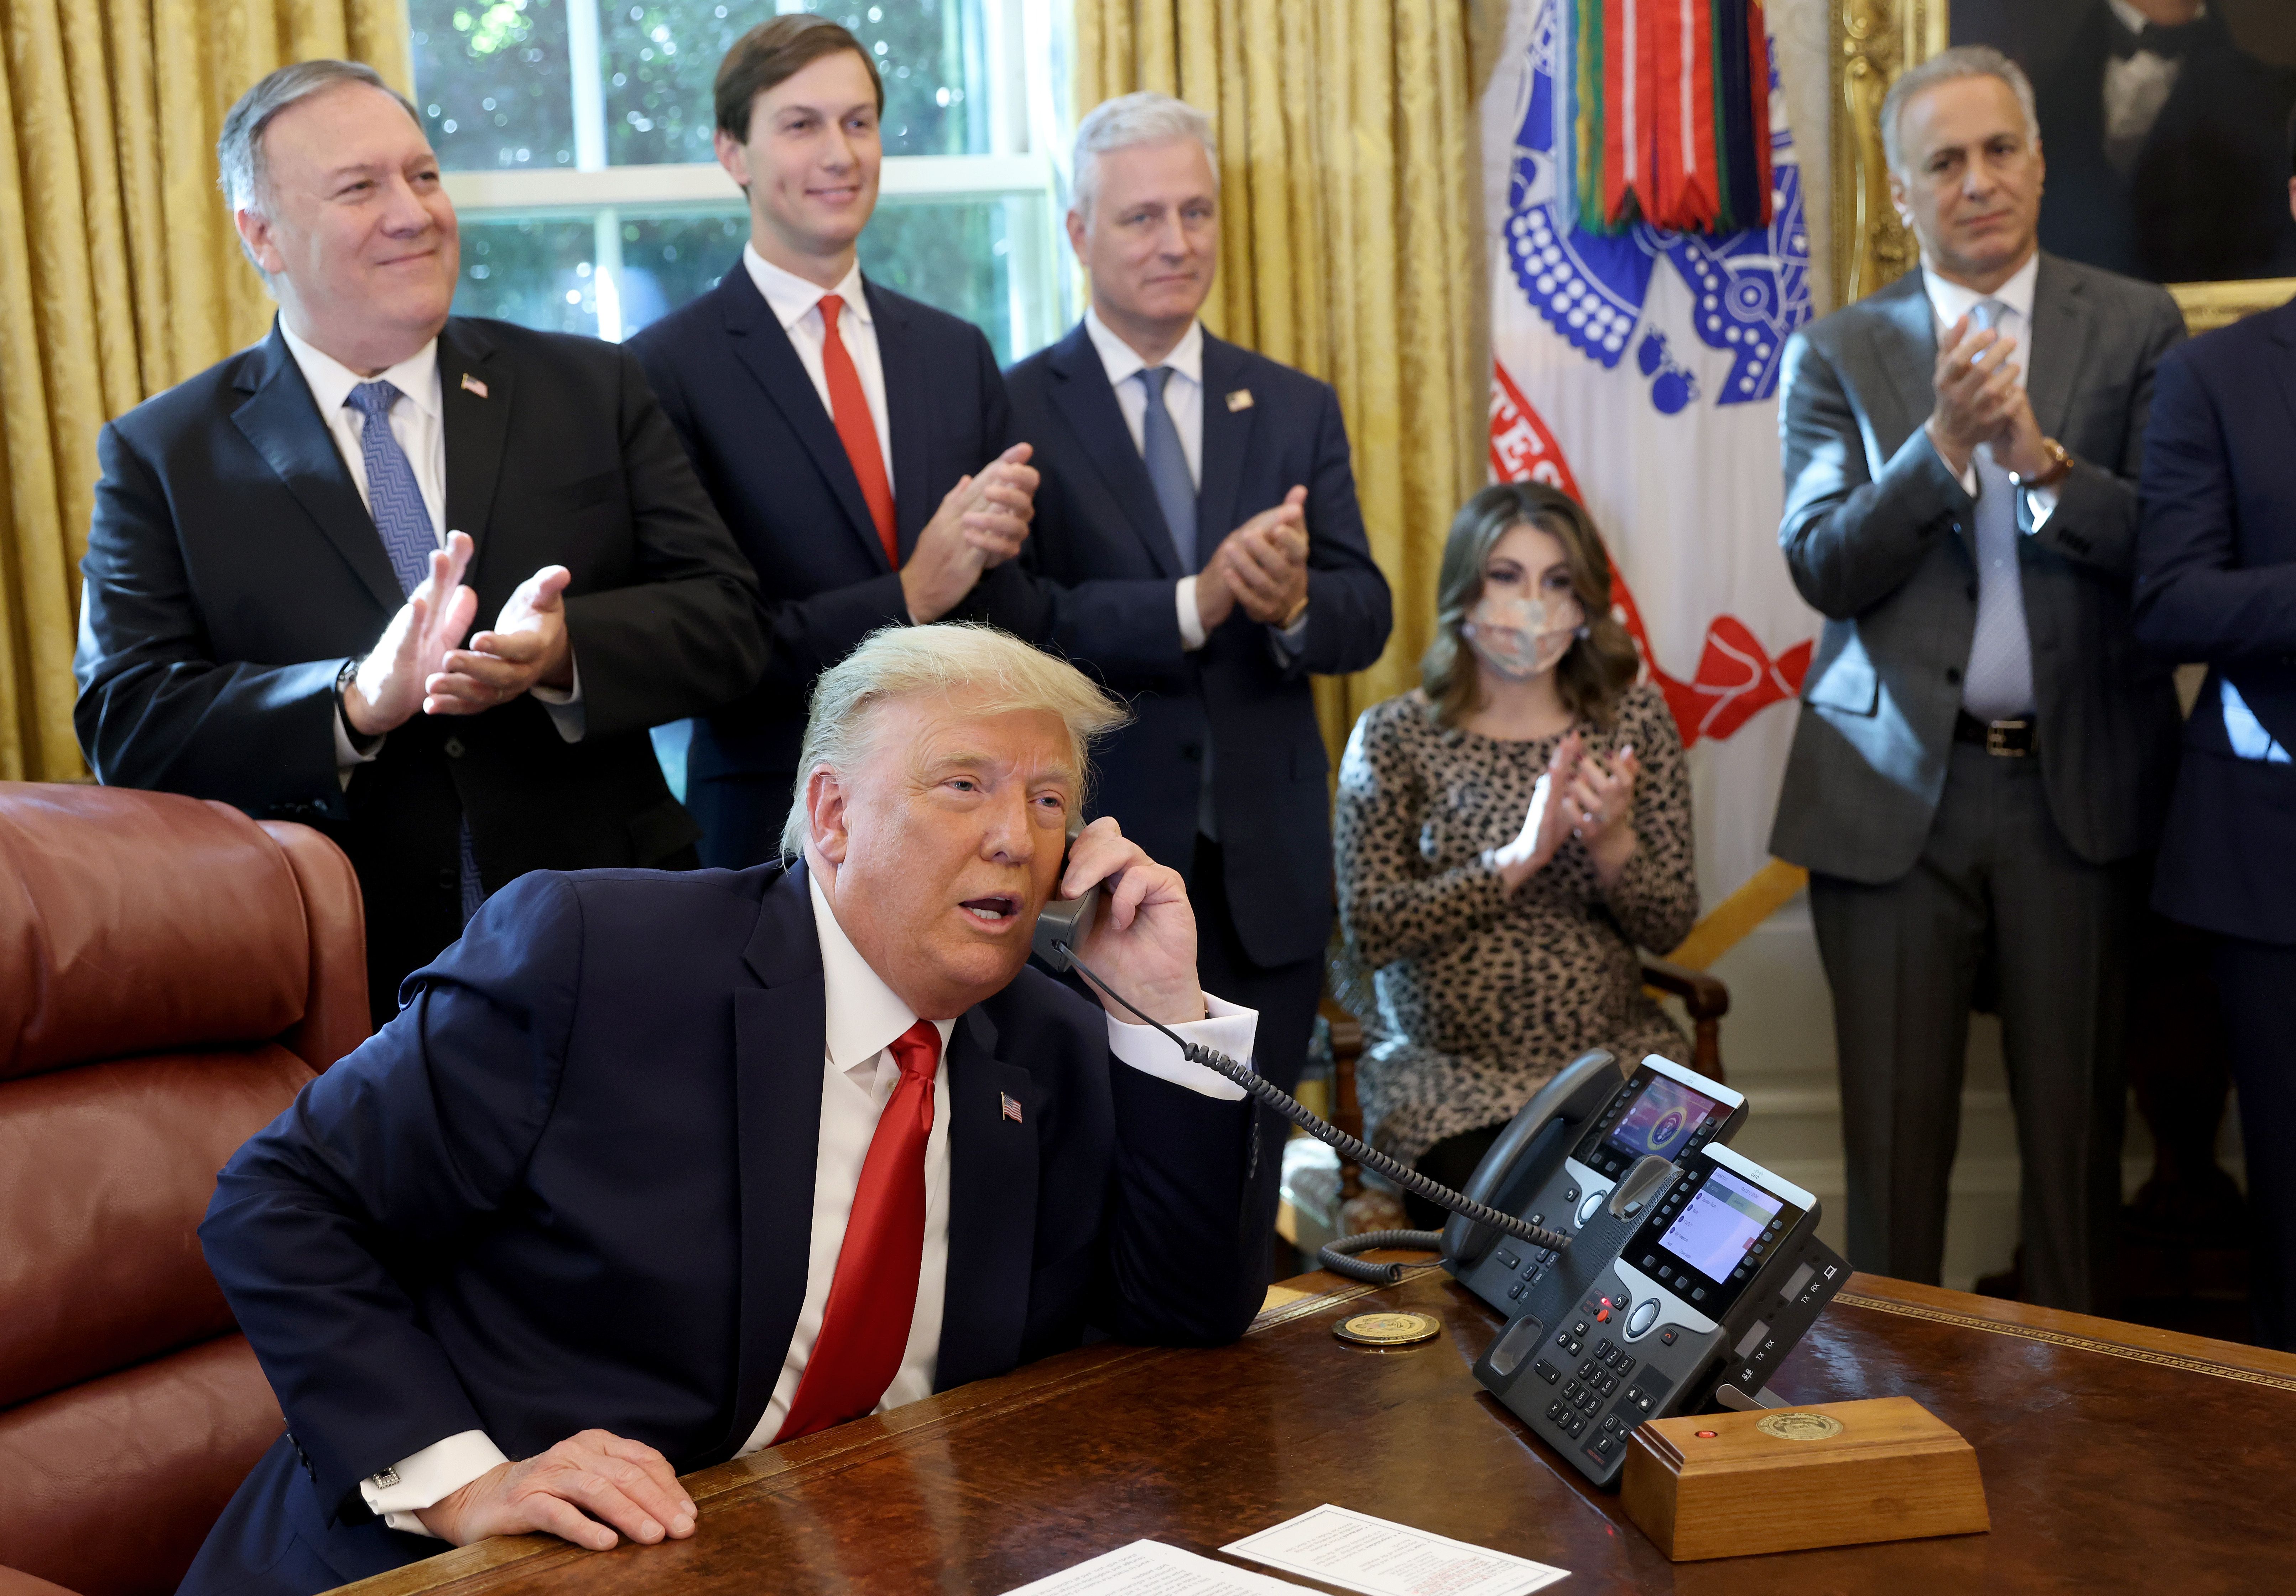 Donald Trump speaks on the phone in the Oval Office.